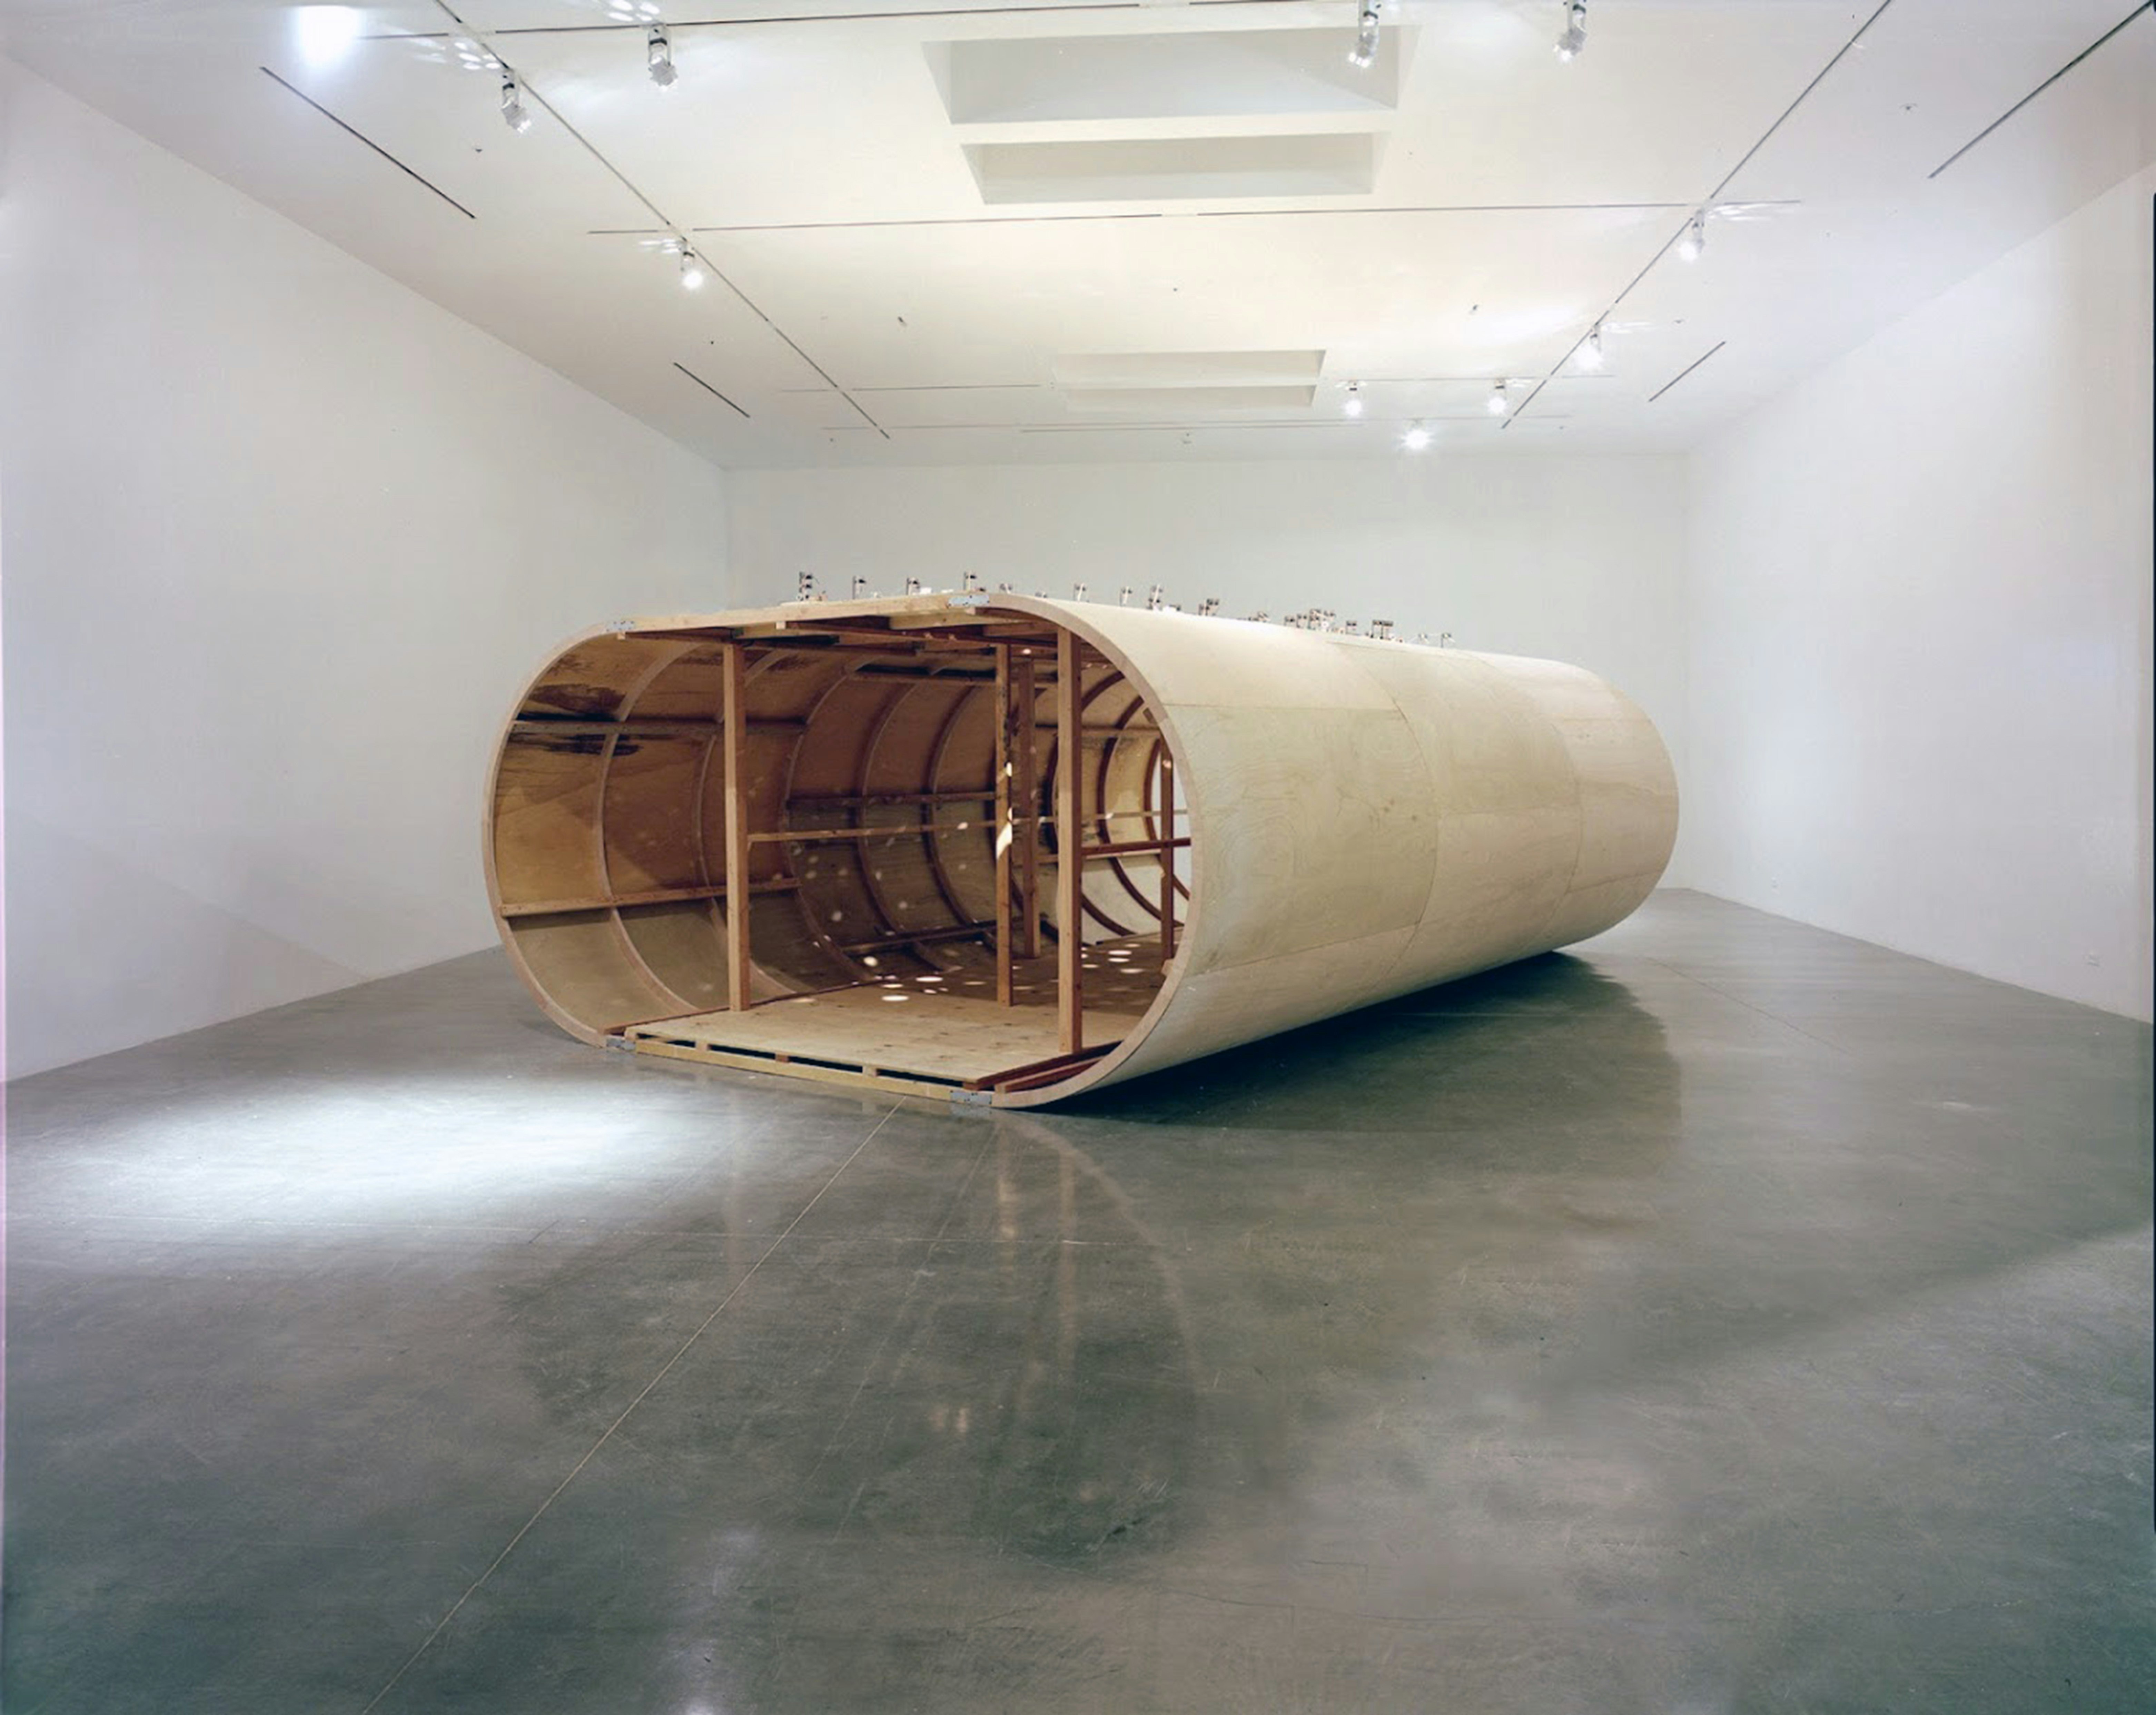 A photograph of a large oval wooden structure in a white walled room on a concrete floor.